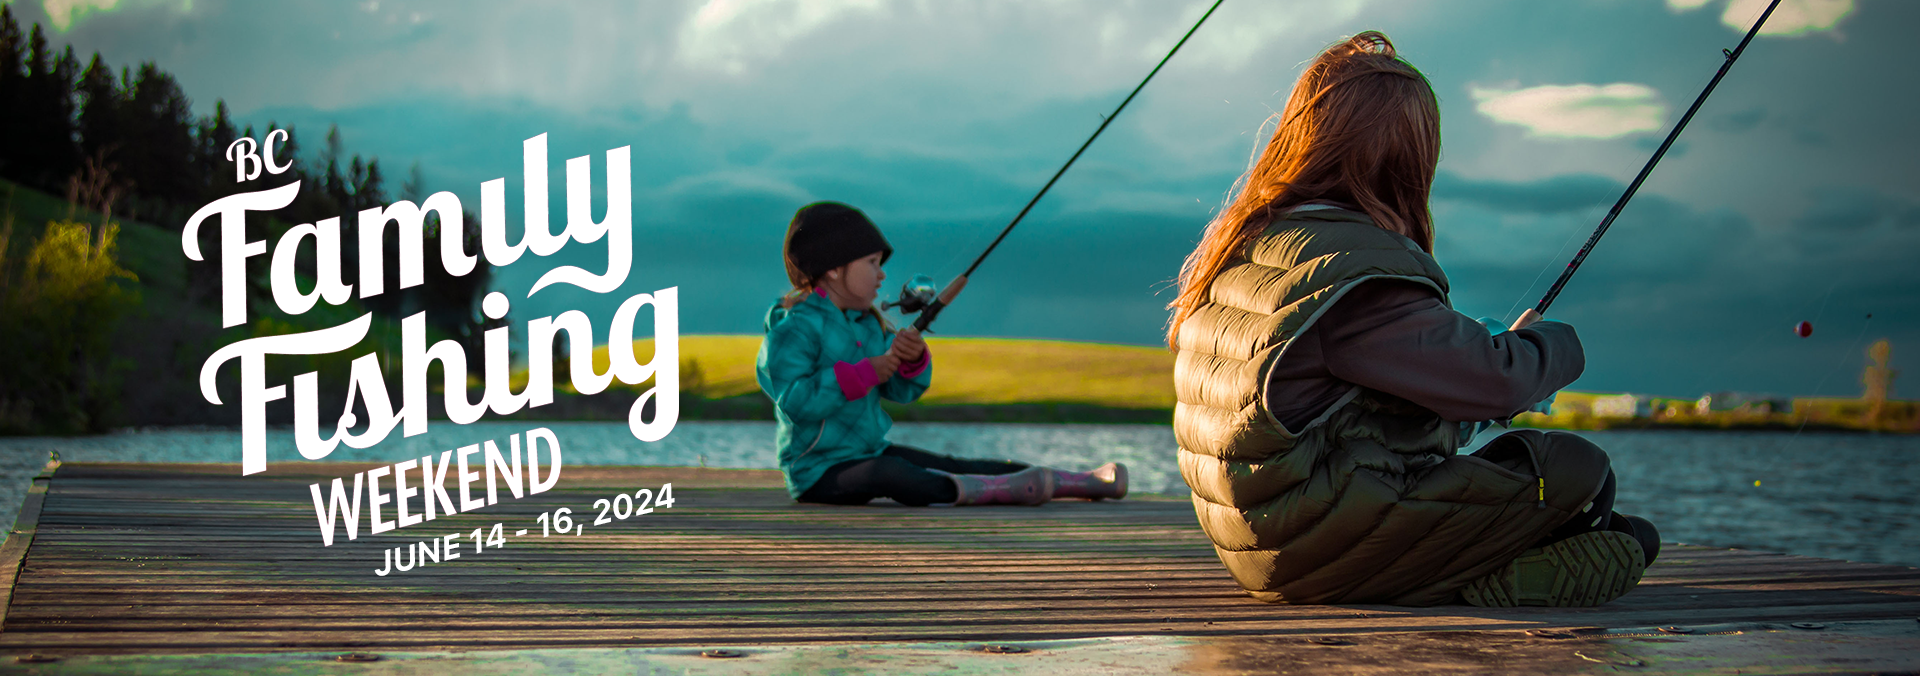 BC Family Fishing Weekend - Freshwater Fisheries Society of BC